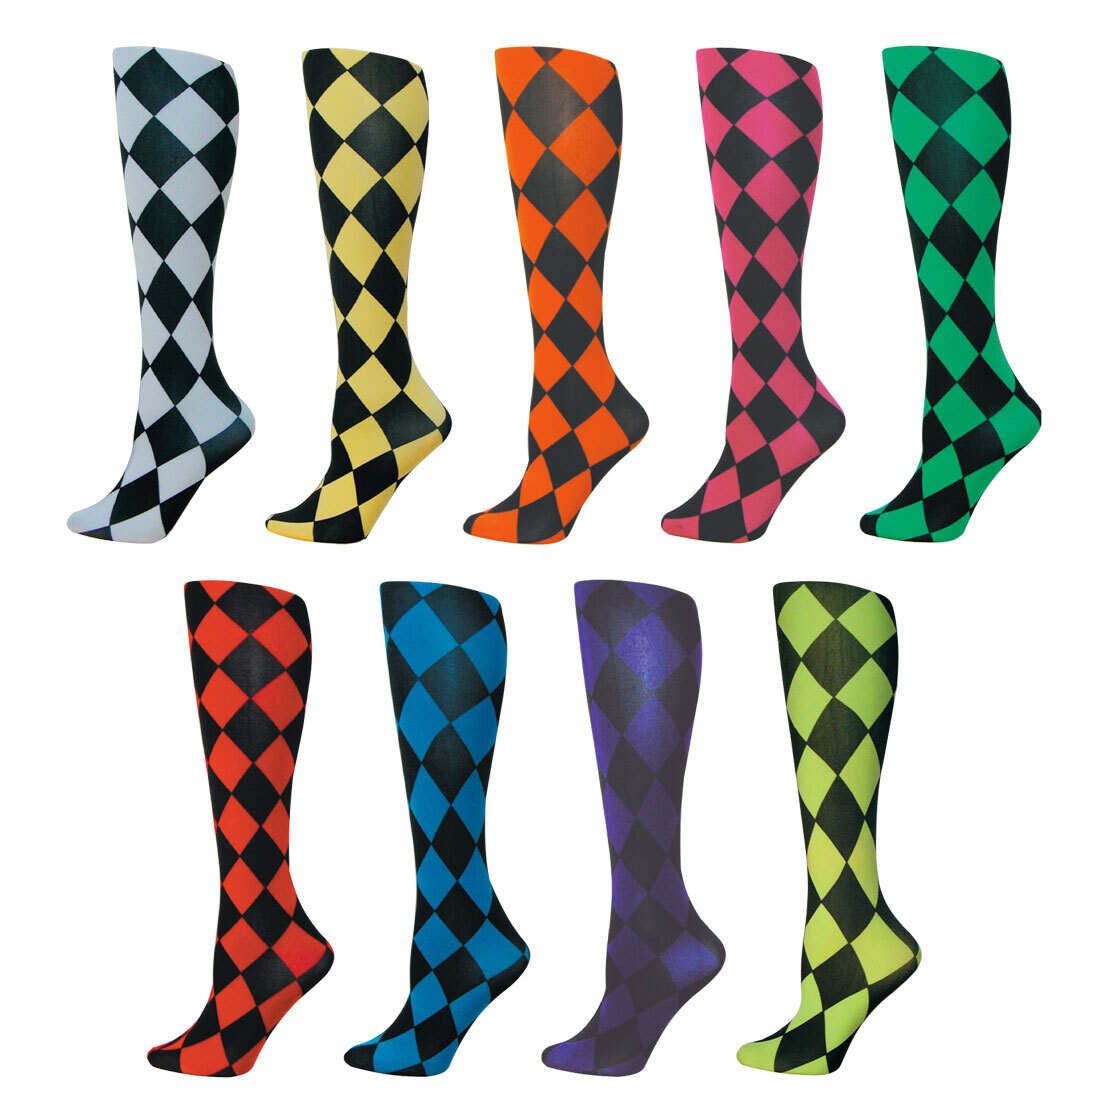 Amazoncom Knee High Trouser Socks wColorful Printed Patterns  Made in  USA by Sox Trot 3 Abigail  Clothing Shoes  Jewelry